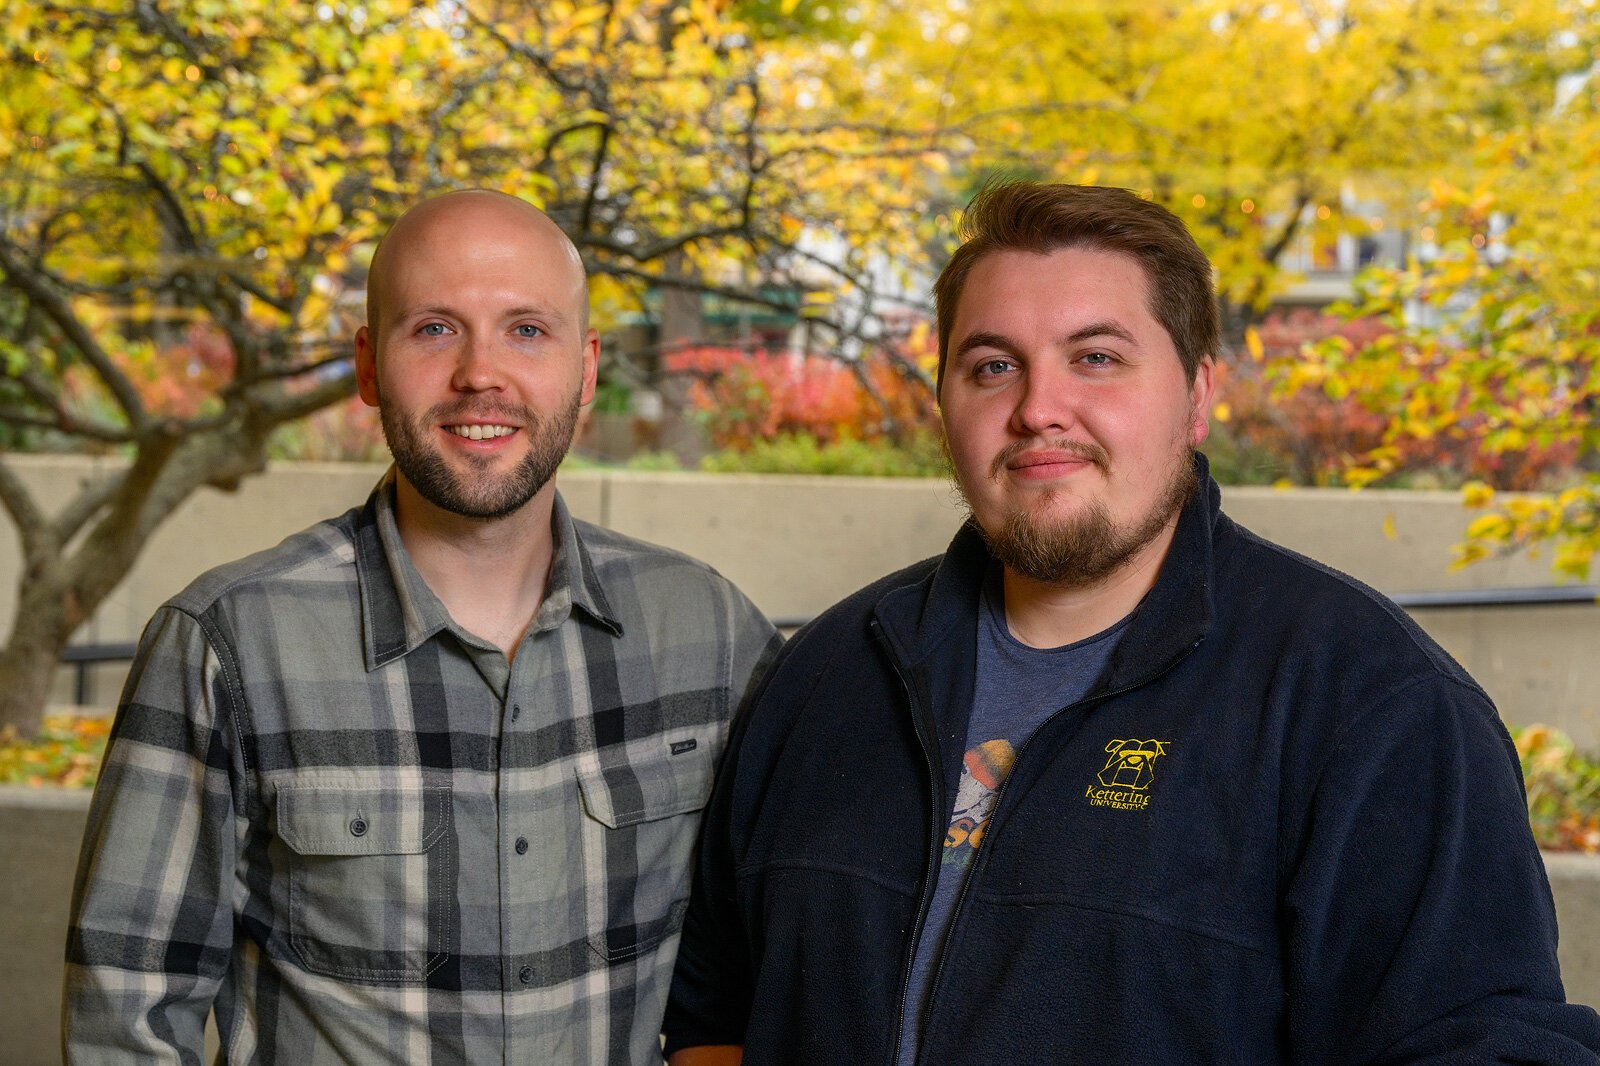 Making video games in the Midwest can be hard, but Ann Arbor developers find community in this group